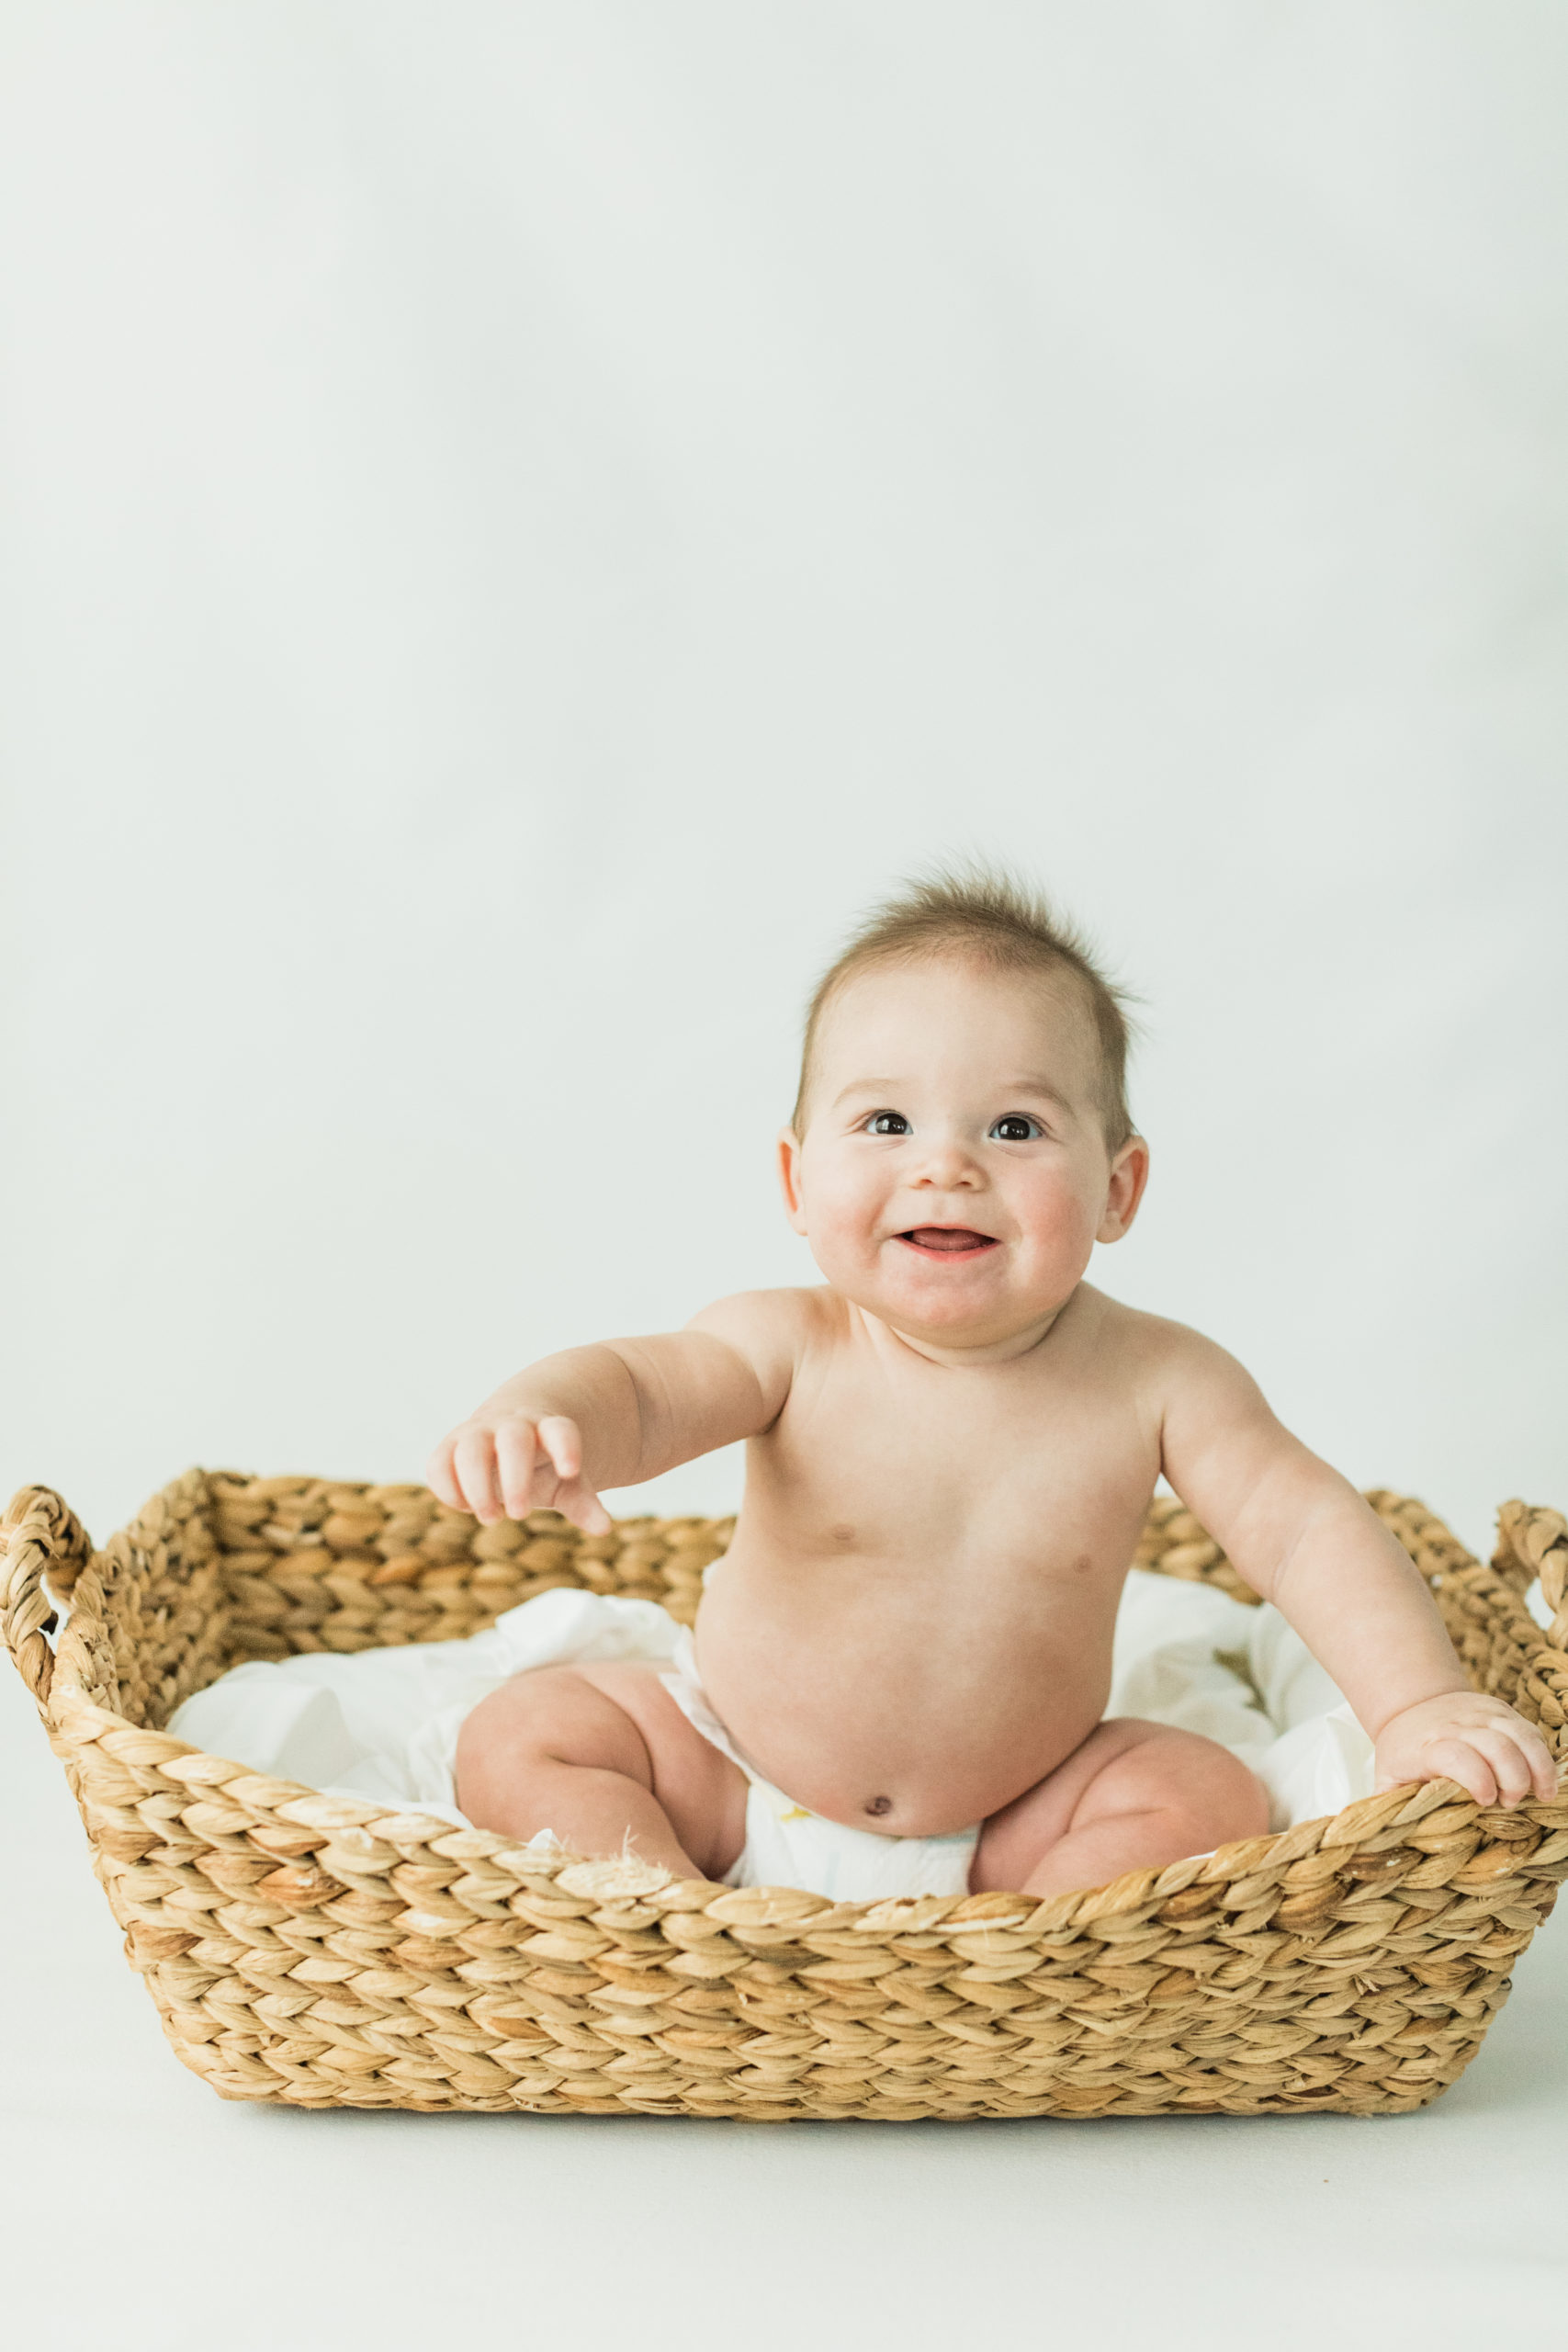 6 month old baby boy in diaper sitting in woven basket with white blanket smiling at camera. Natural light photographer.